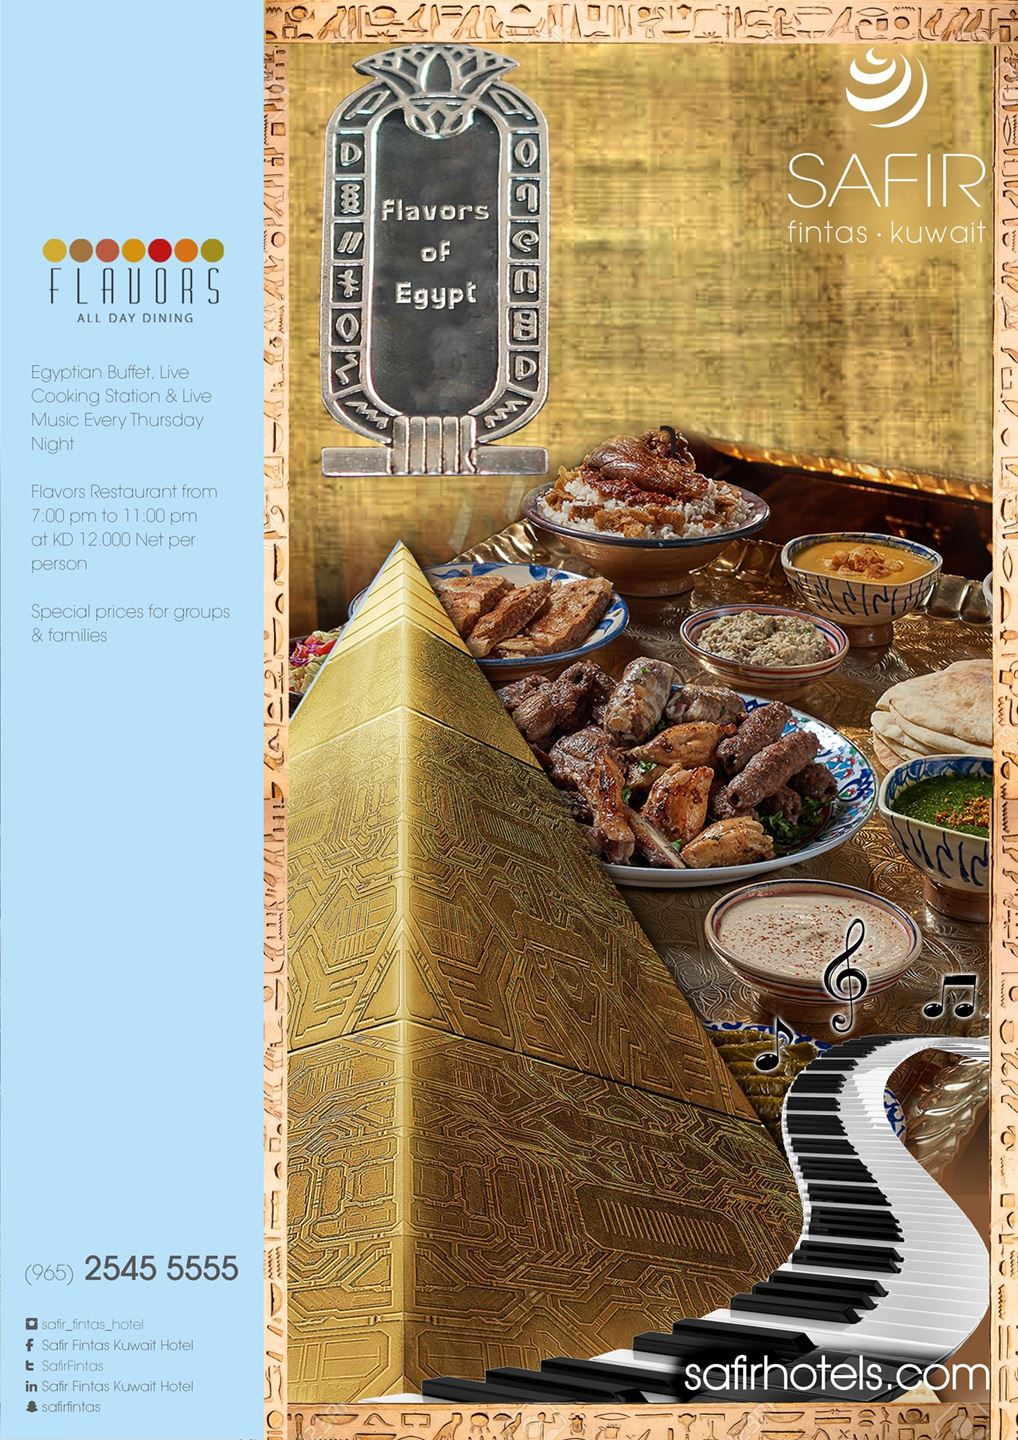 Safir Fintas Kuwait Hotel launches "Flavors of Egypt" every Thursday